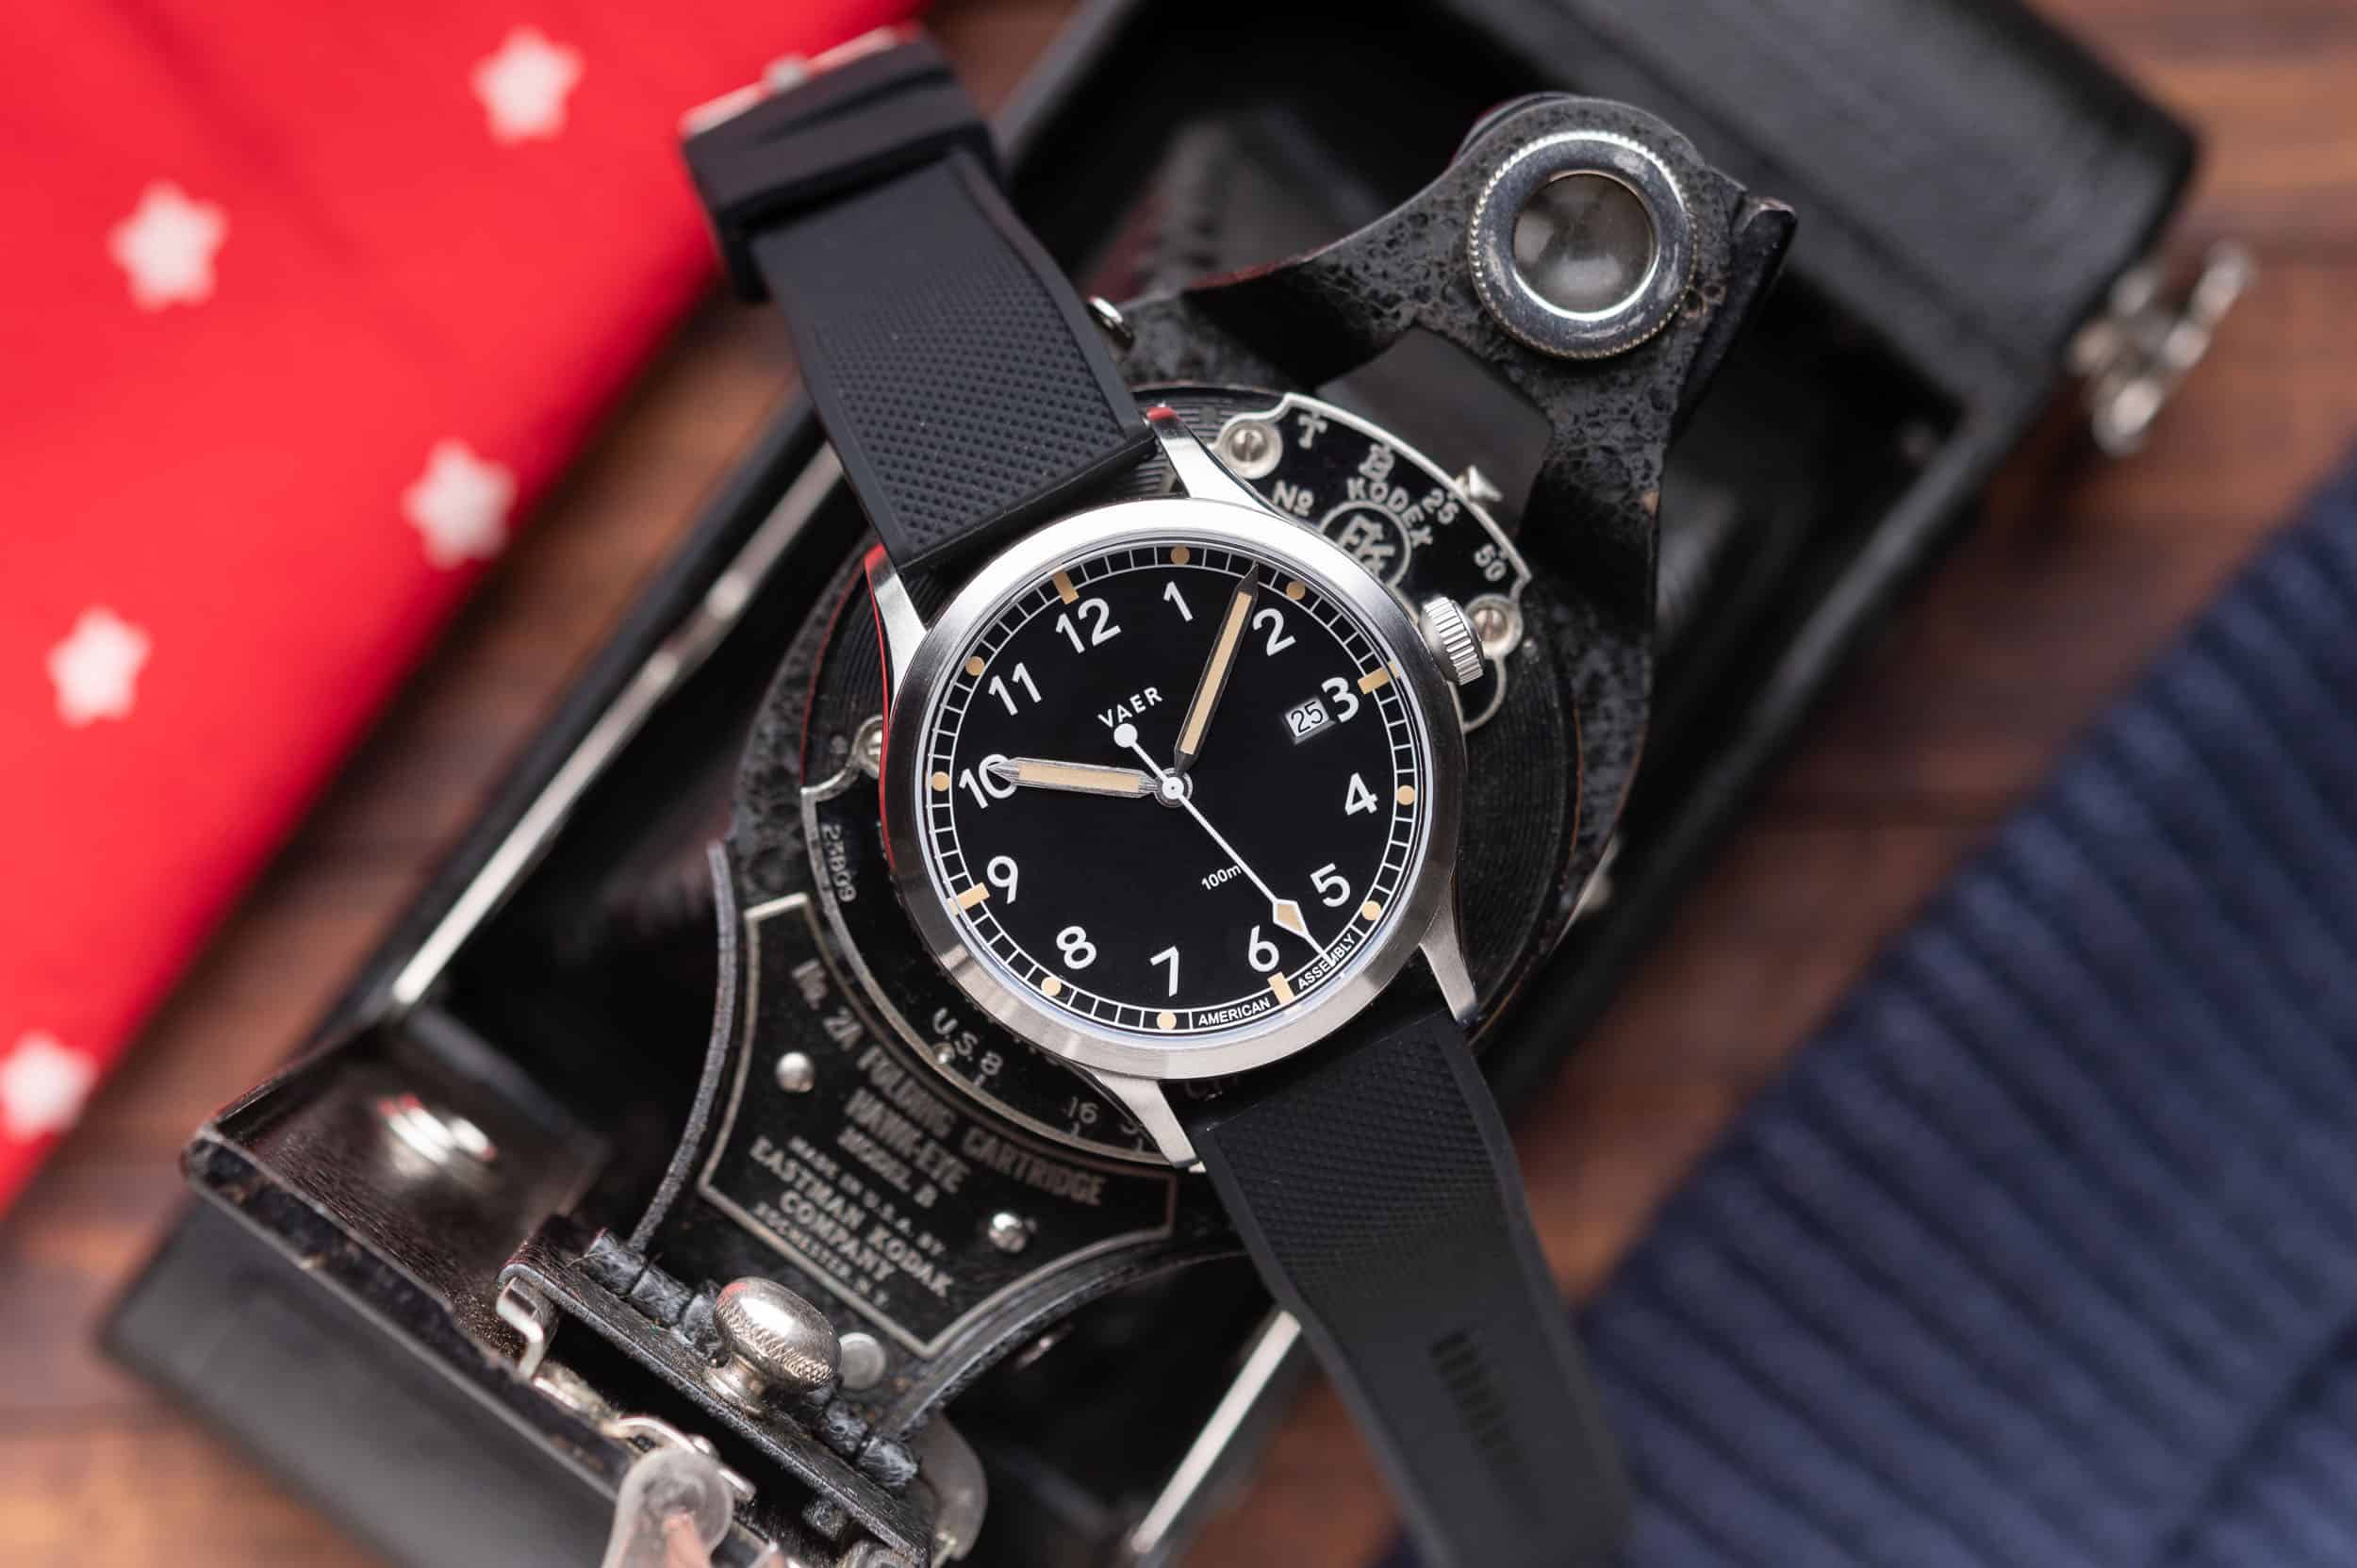 Affordable, American-Assembled Tool Watches by Vaer are Now Available at the Windup Watch Shop